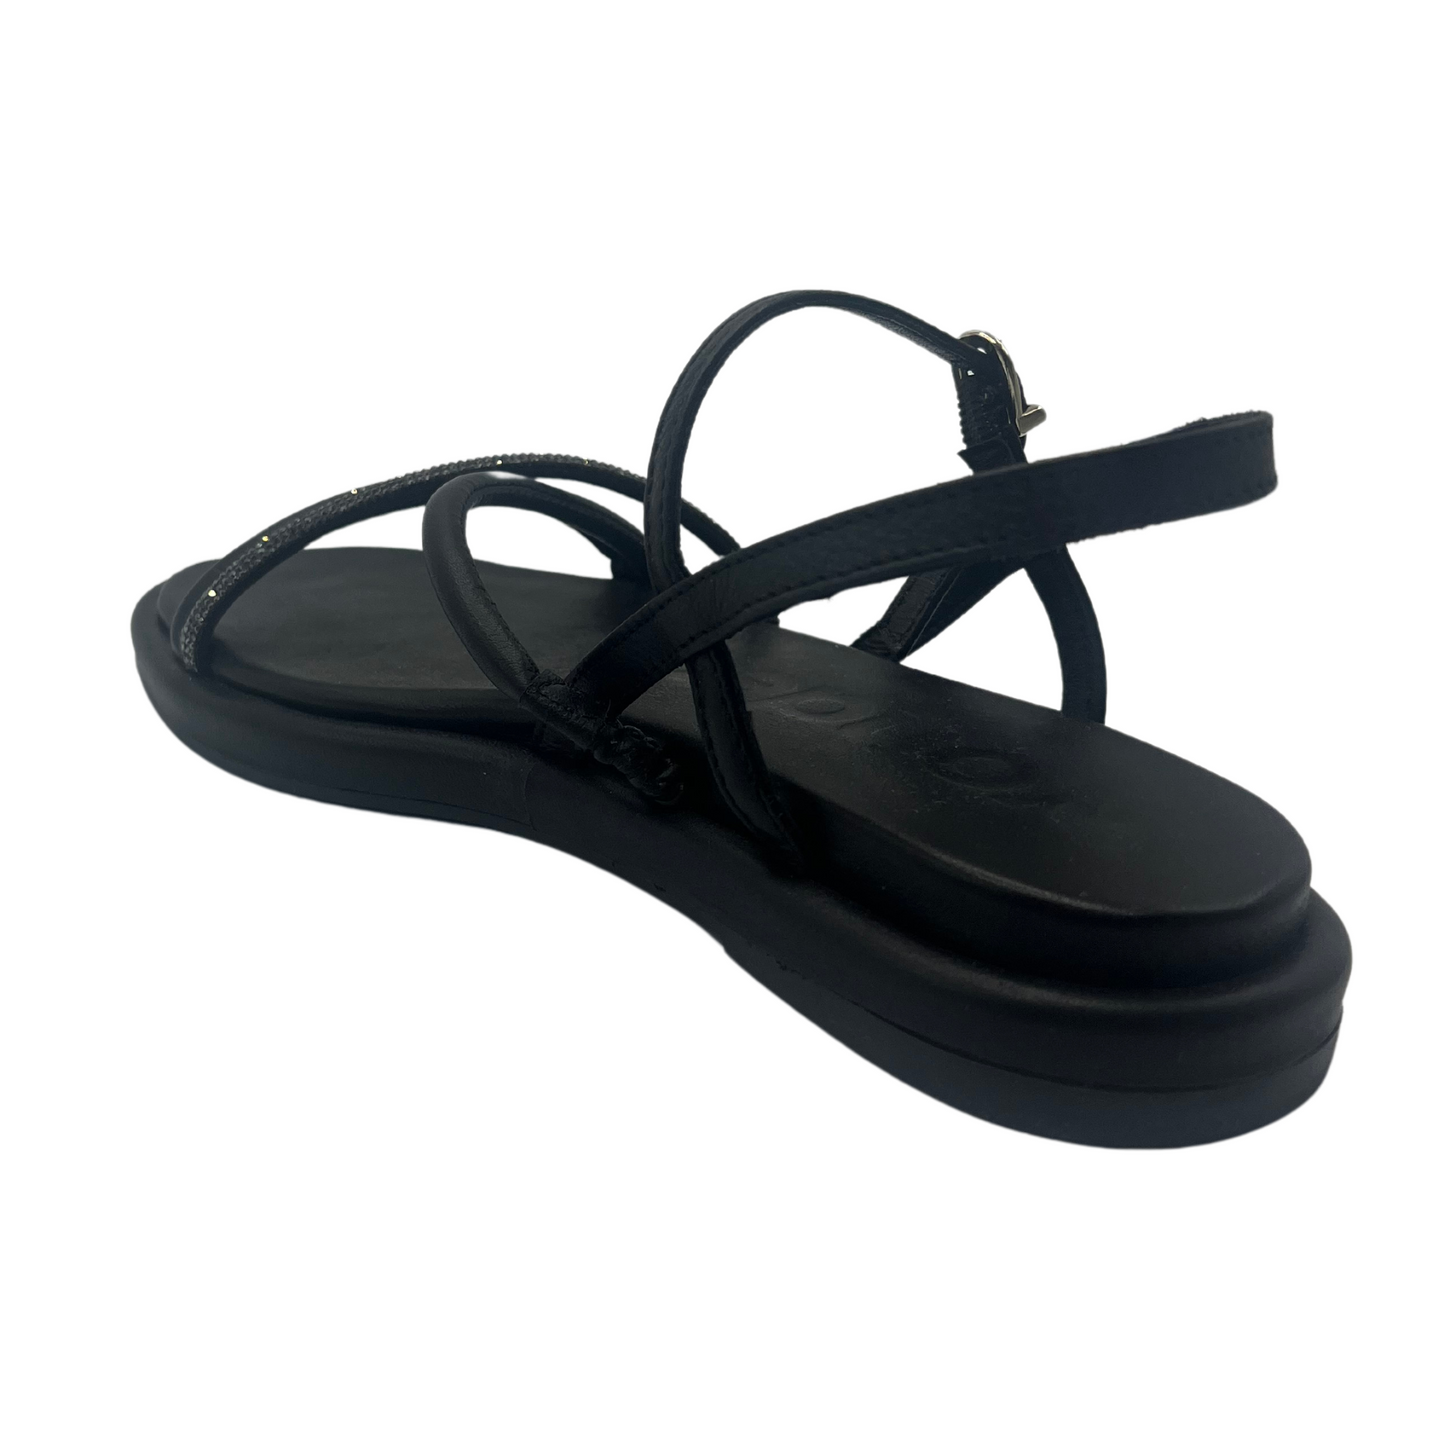 Back angled view of black leather sandal with padded sole, rhinestone detail and square toe